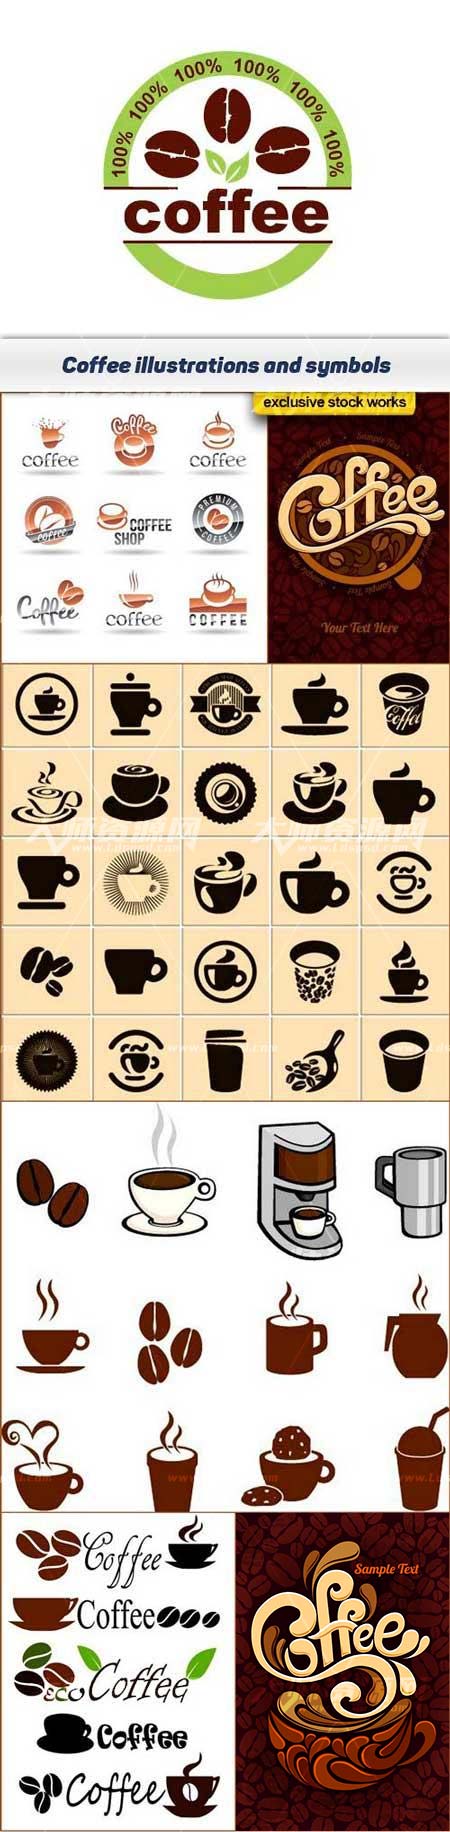 Coffee and hot drinks illustrations and symbols